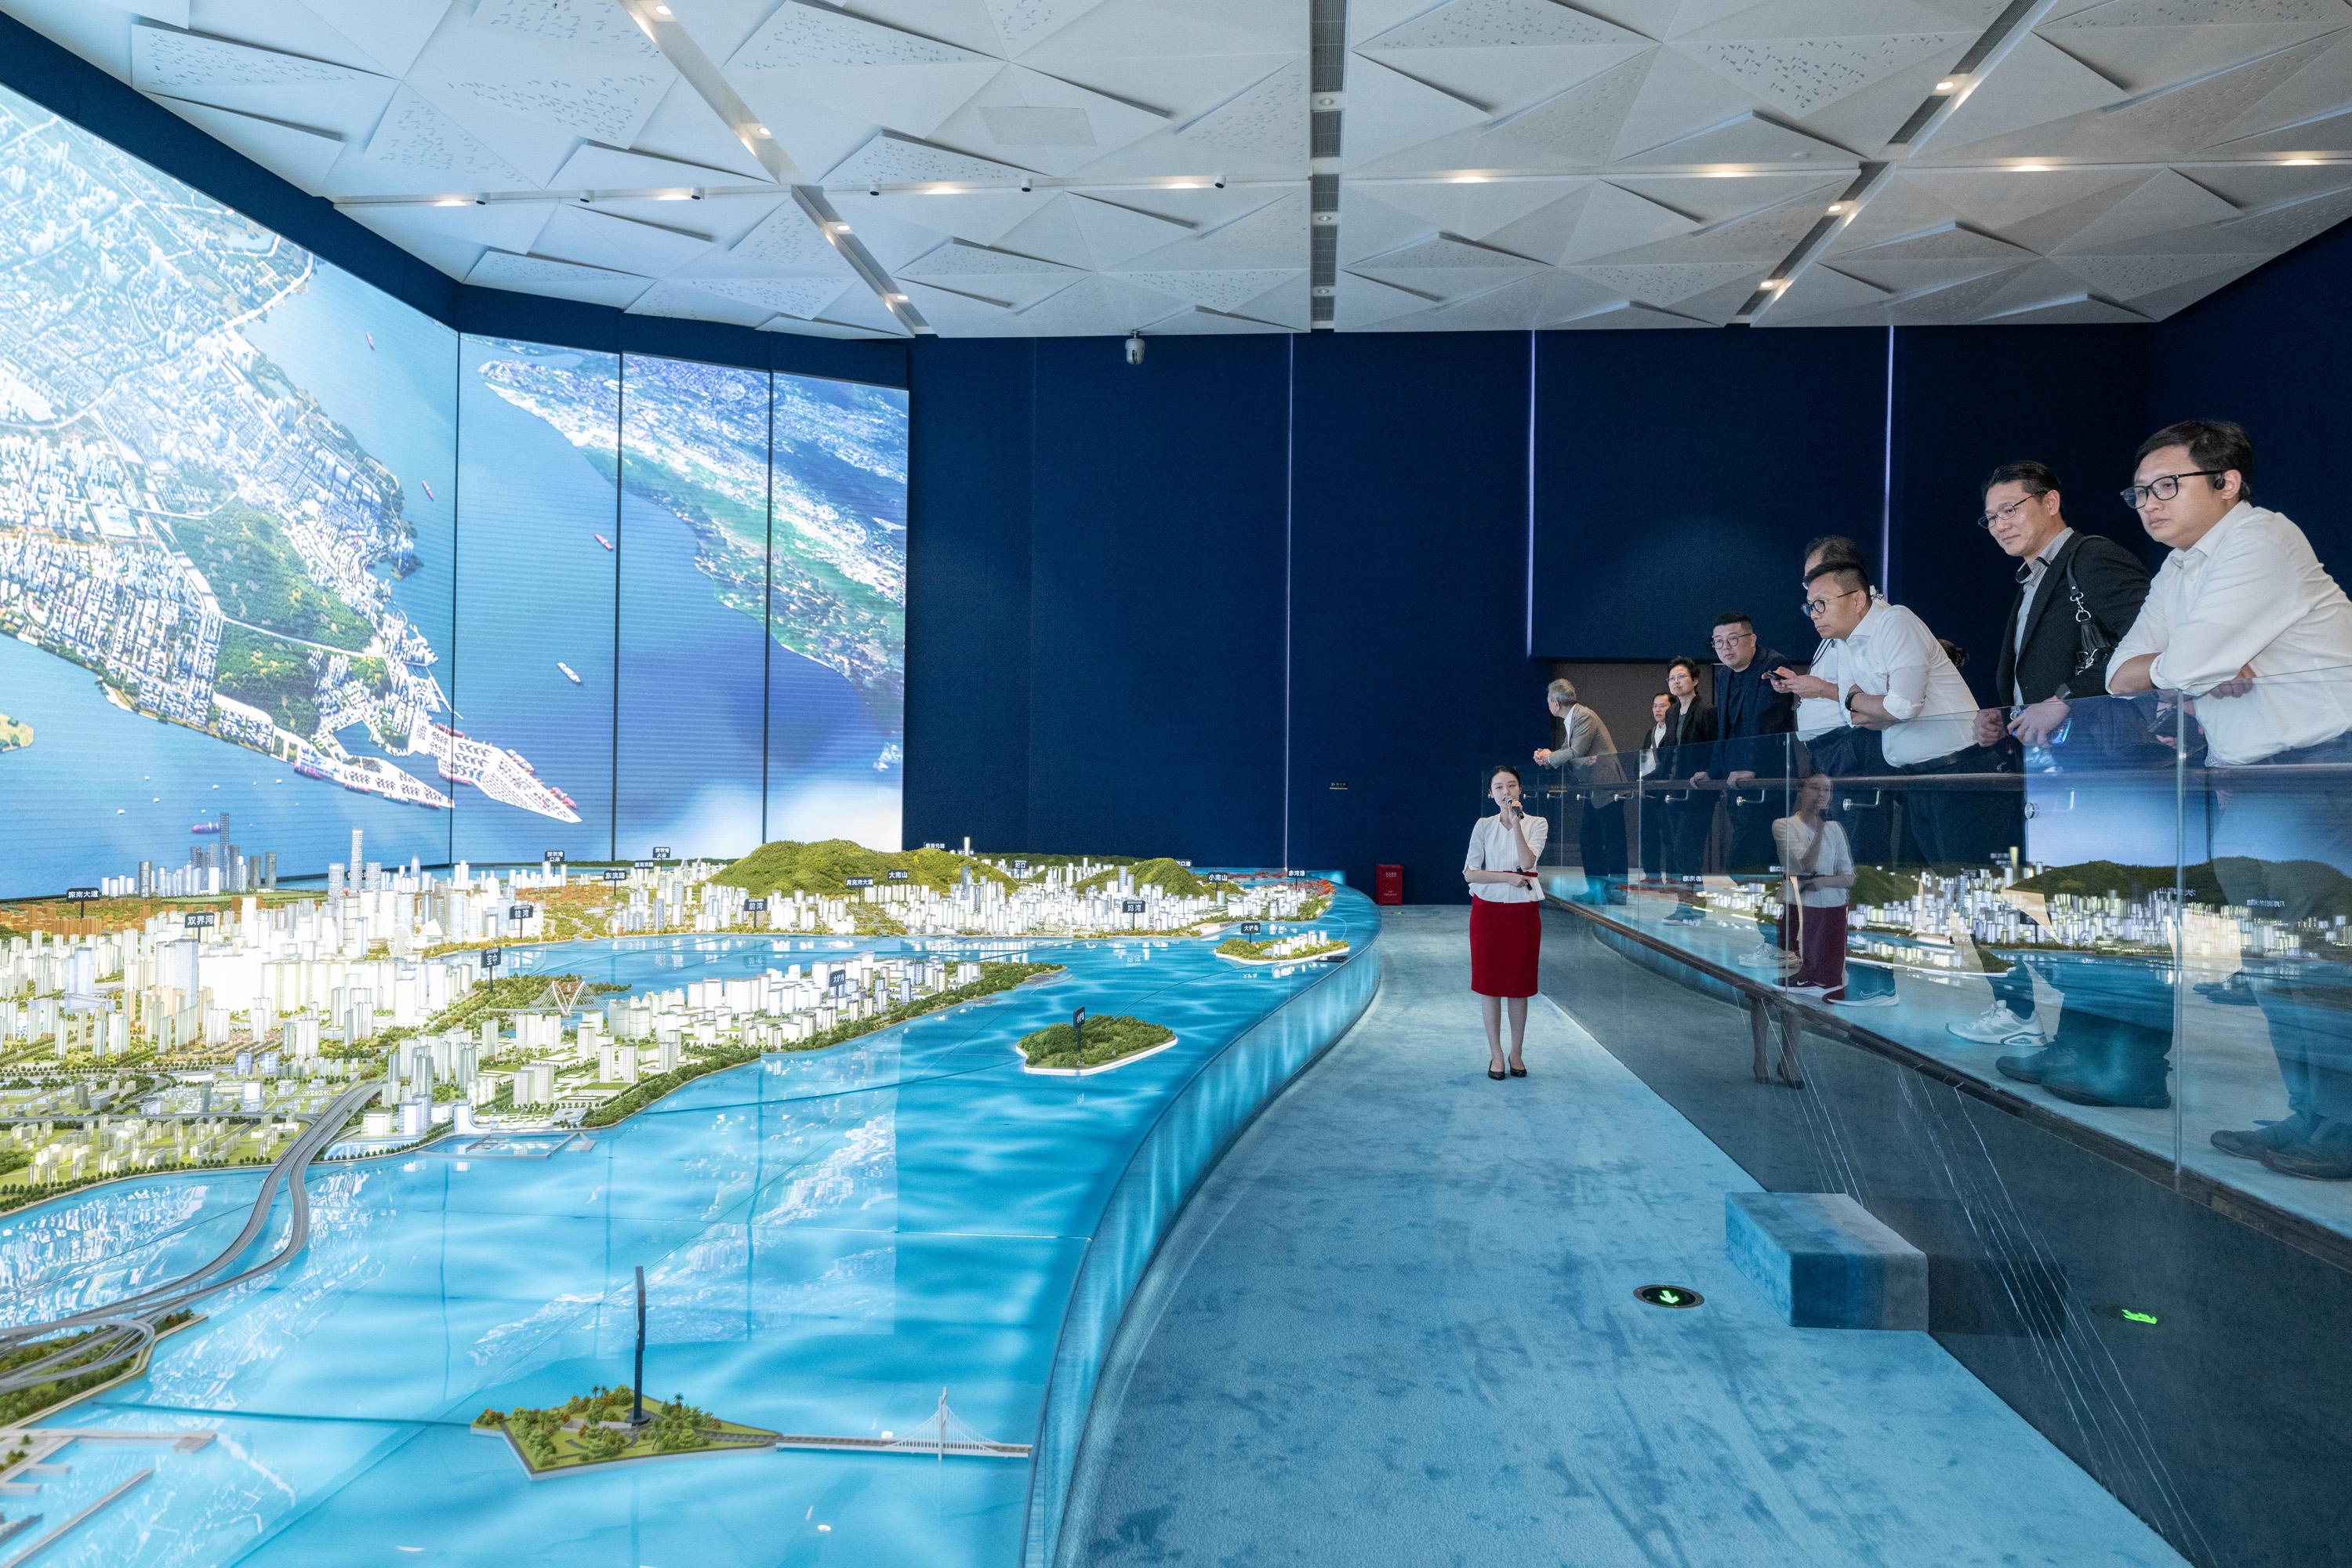 The Legislative Council (LegCo) Subcommittee on Matters Relating to the Development of the Northern Metropolis conducted a duty visit to Shenzhen today (May 16). LegCo Members learnt about the latest development of Qianhai.